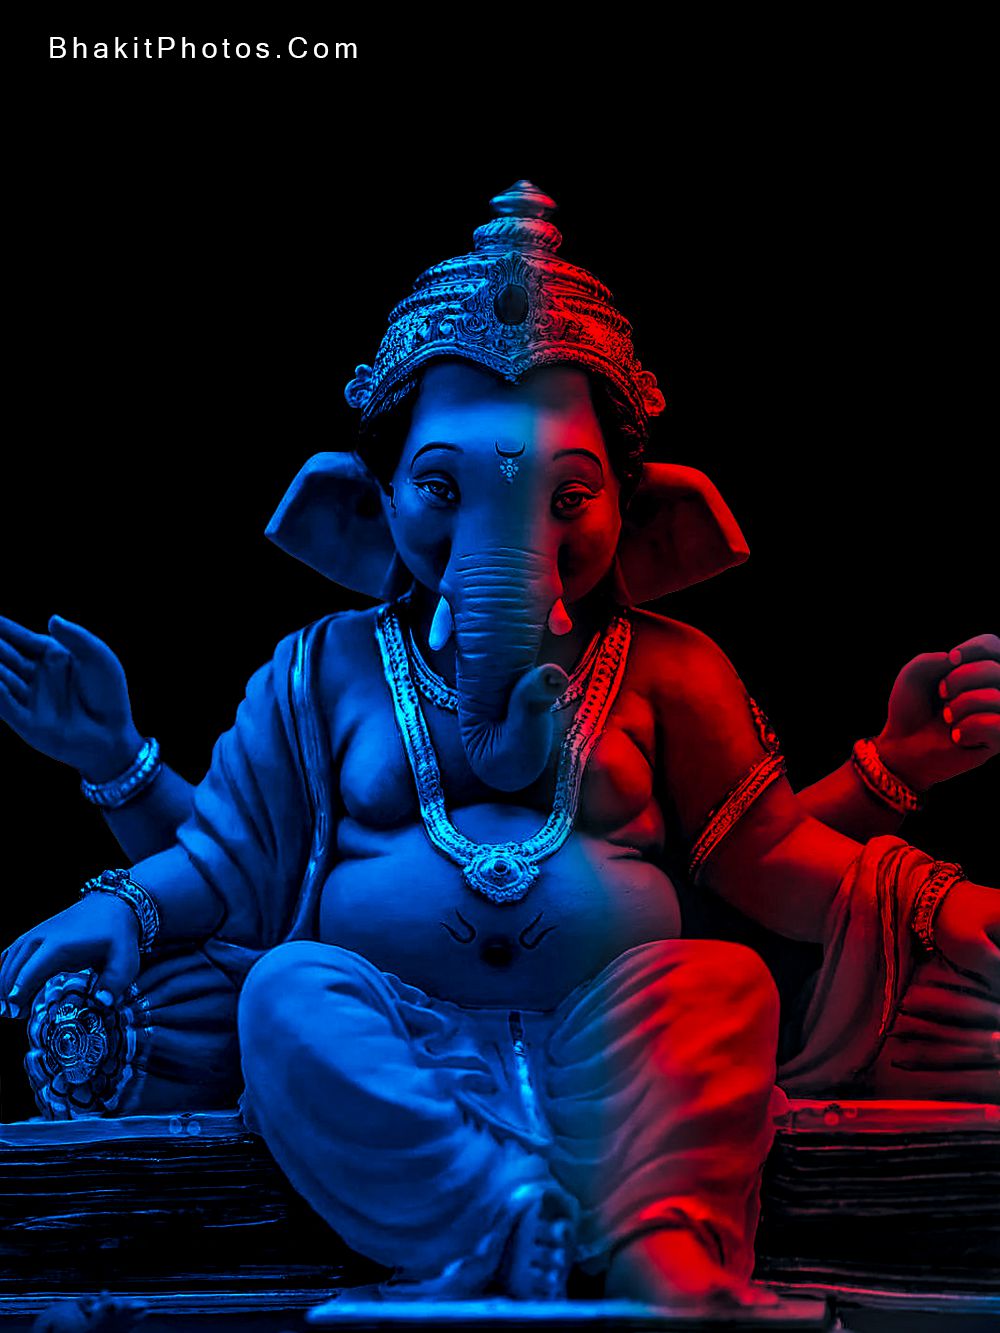 Incredible Compilation of 999+ Vinayagar Images in HD 1080p and Full 4K Quality